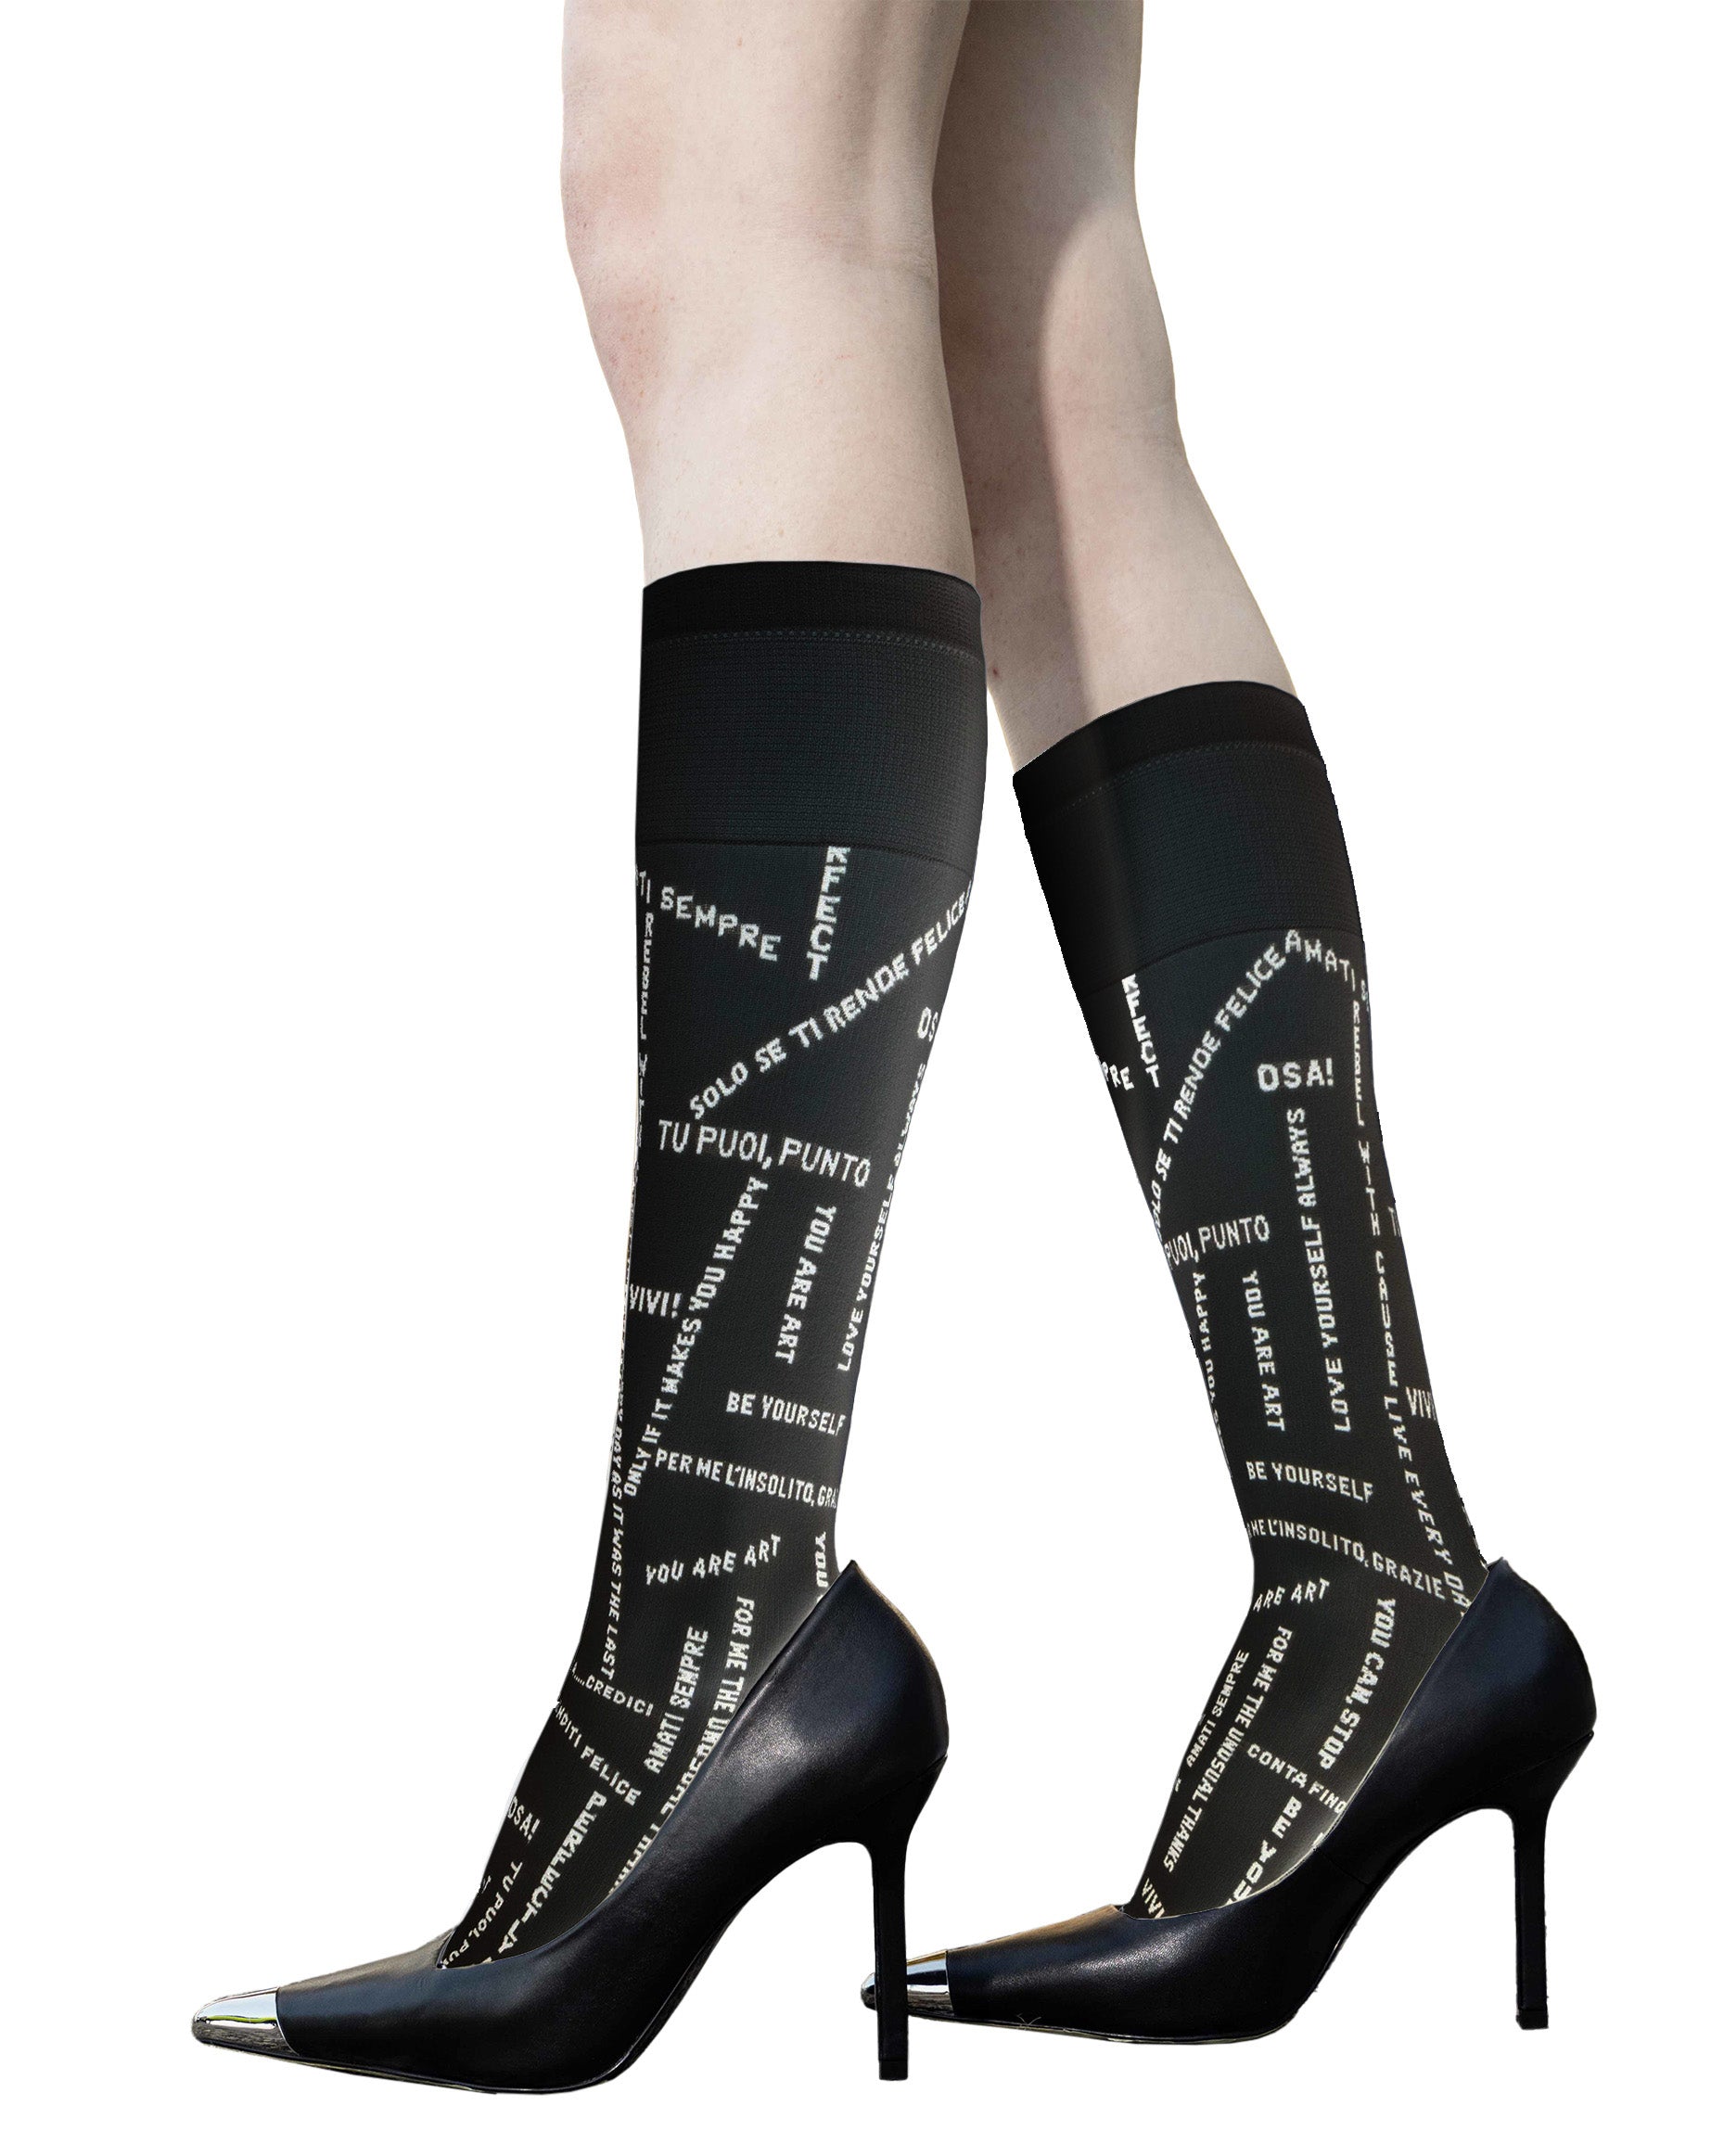 Trasparenze Las Vegas Knee-High Socks - Black opaque fashion knee-high socks with slogans and motivational text woven pattern in white.